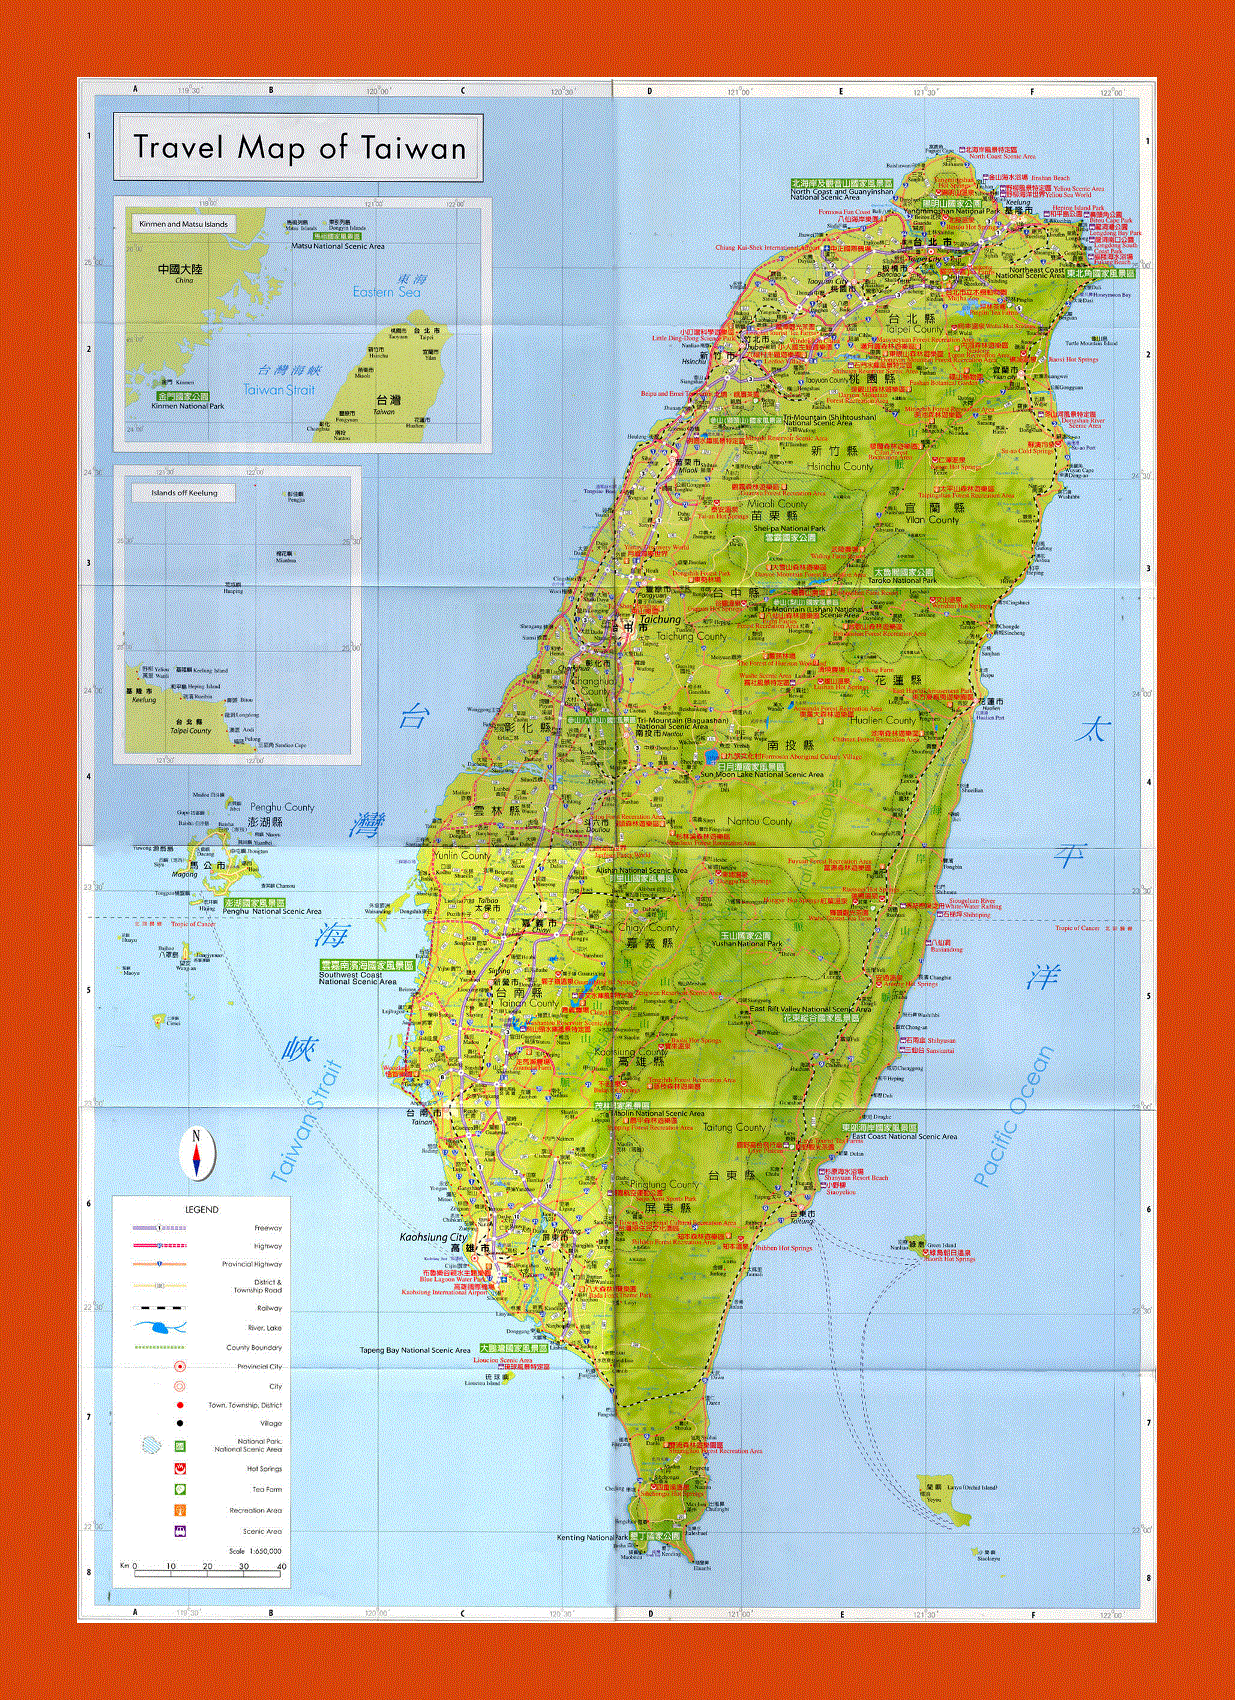 Travel map of Taiwan